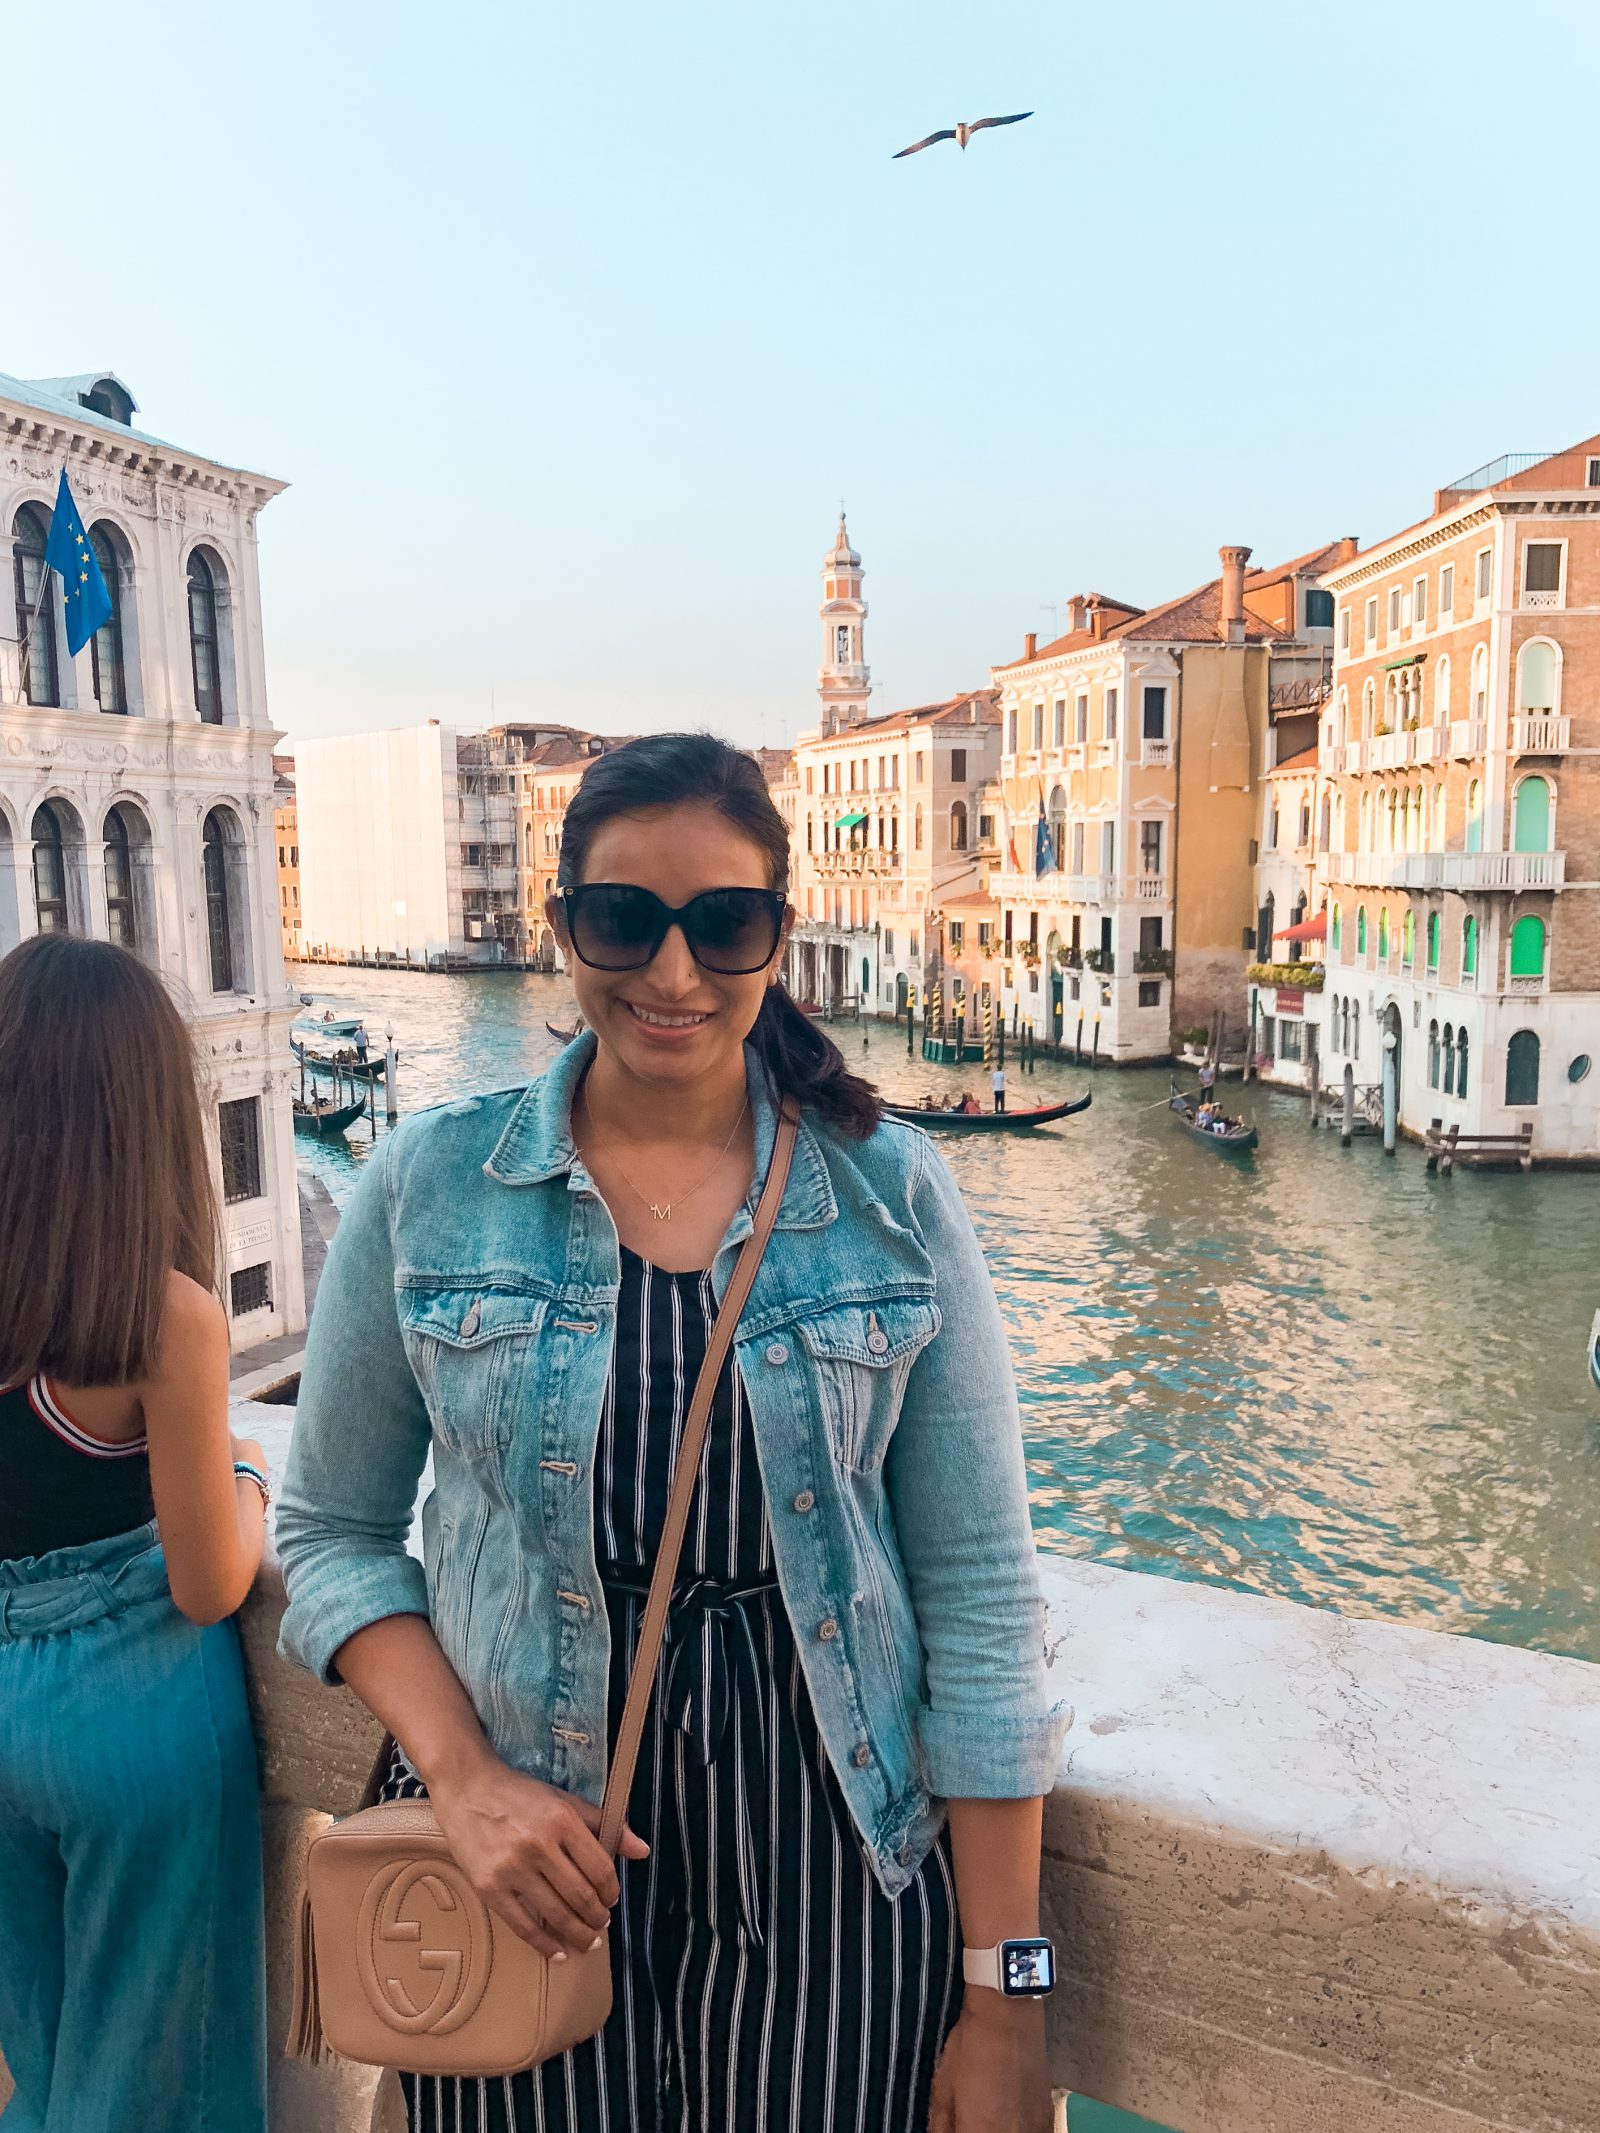 a picture of me with the canals and a gondola in the background